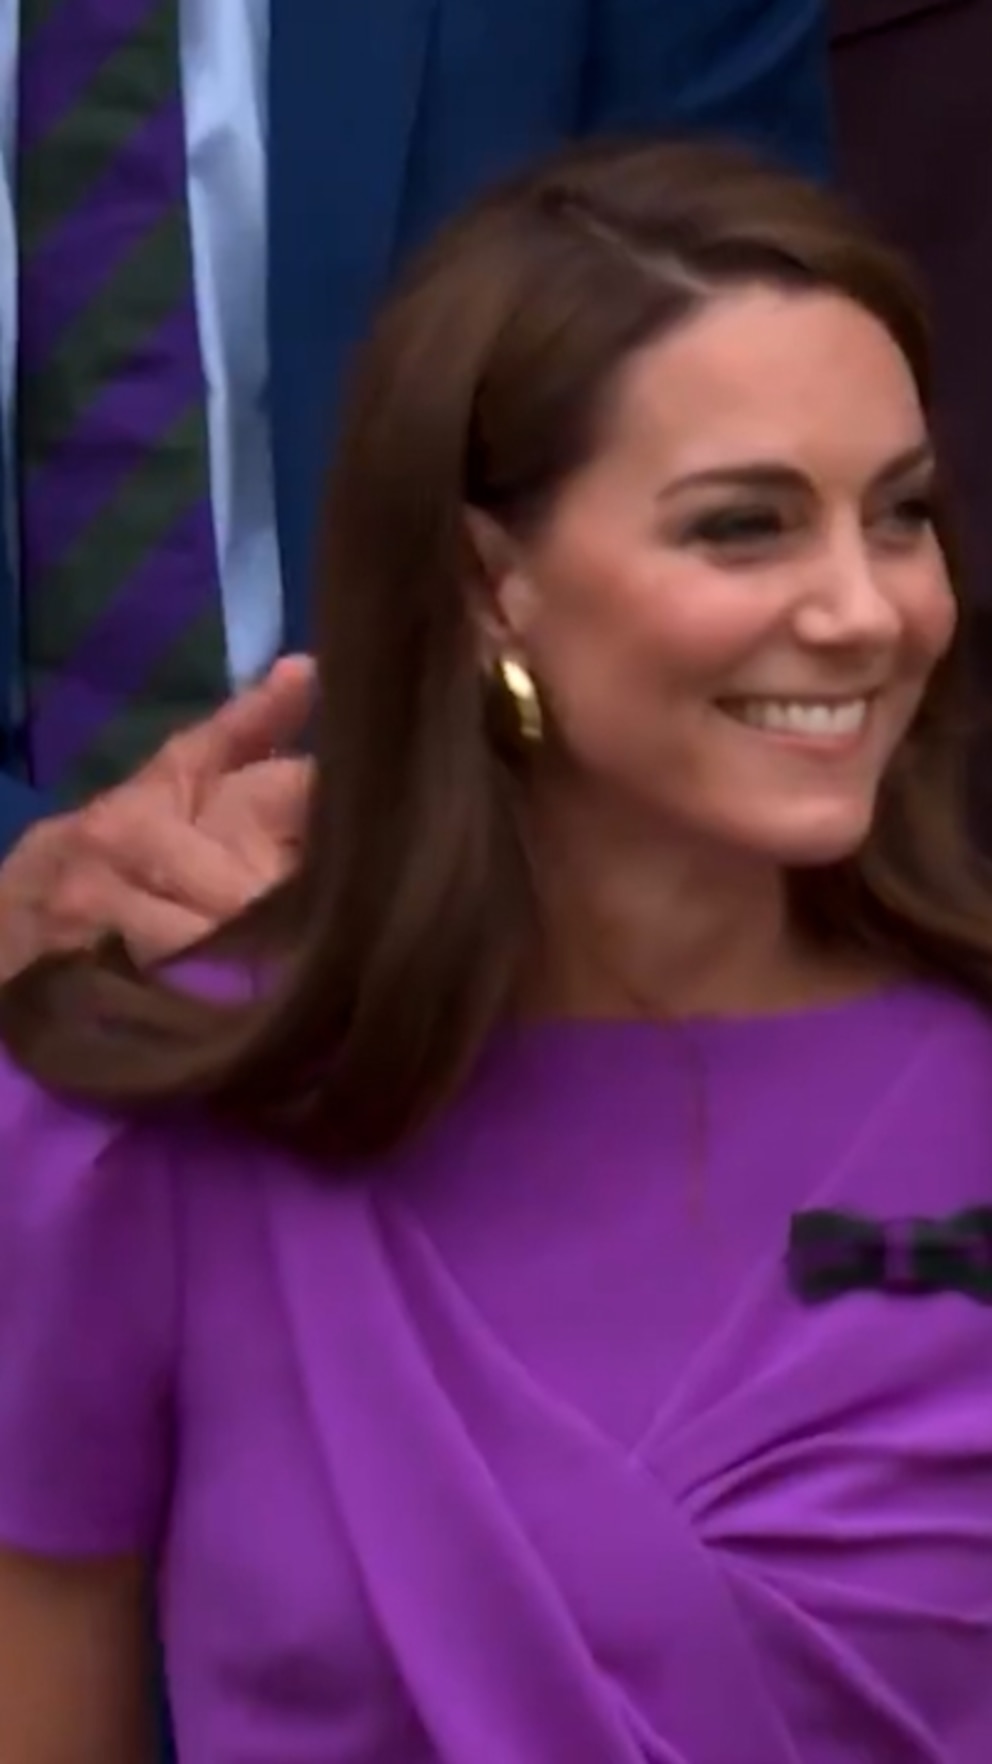 WATCH: Kate Middleton receives standing ovation at Wimbledon amid cancer treatment